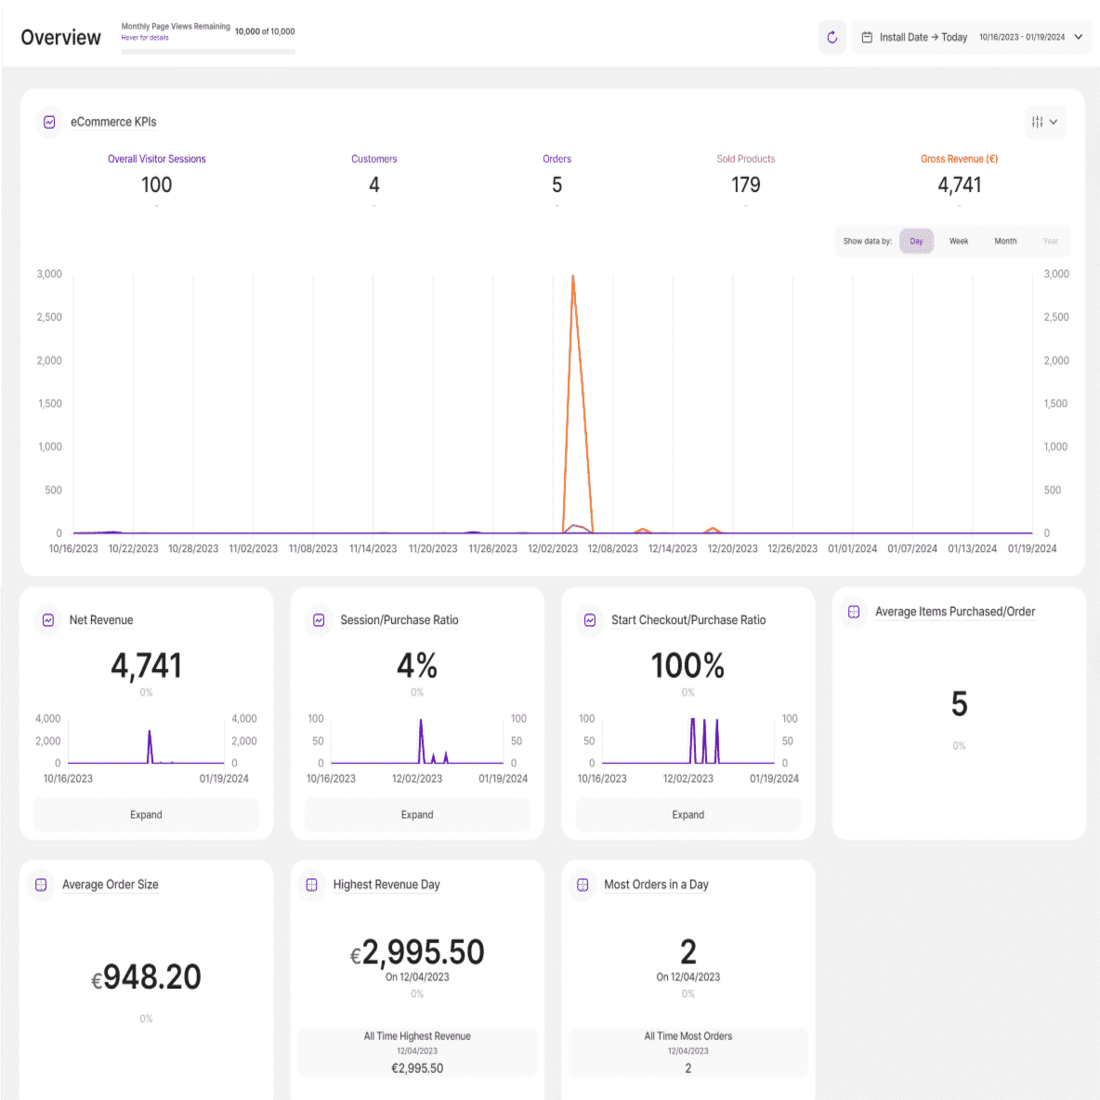 A preview of TWIPLA's eCommerce KPI dashboard